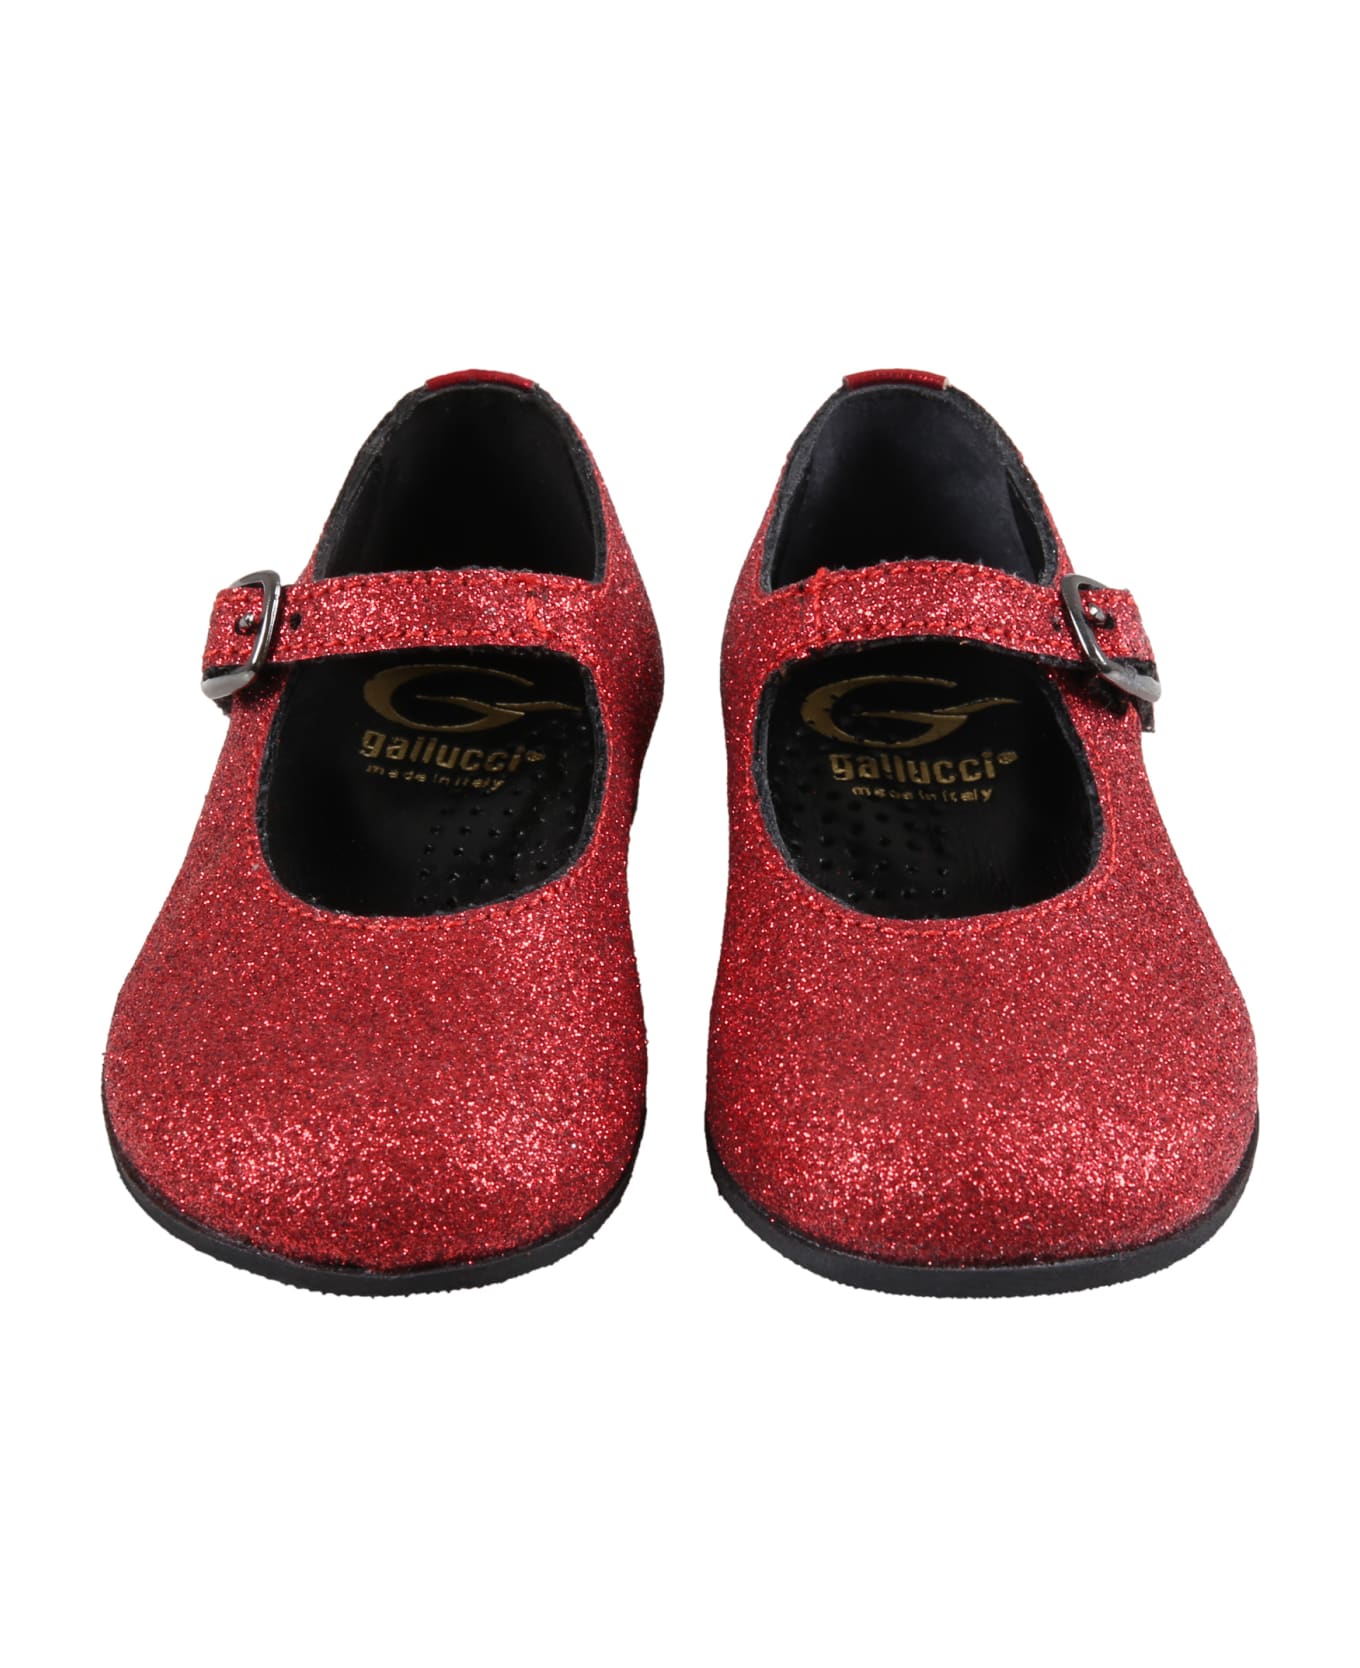 Gallucci Red Ballet Flats For Girl - Red